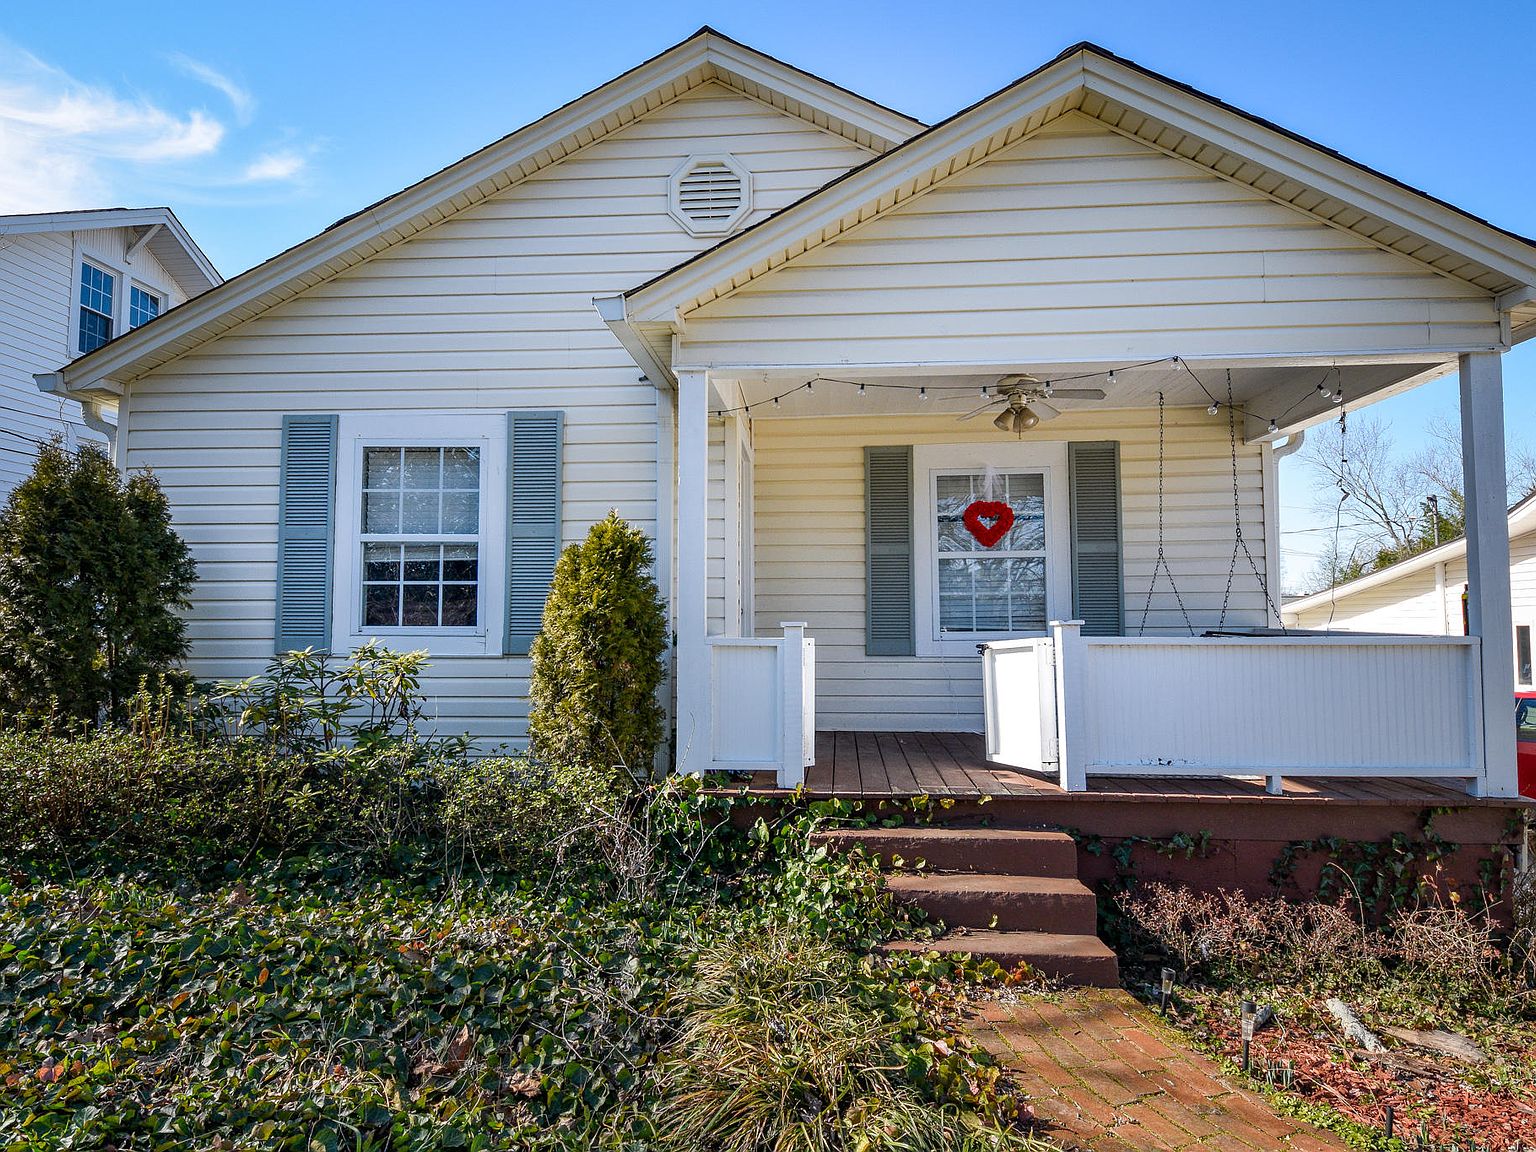 1533 Harle Ave NW, Cleveland, TN 37311 Zillow